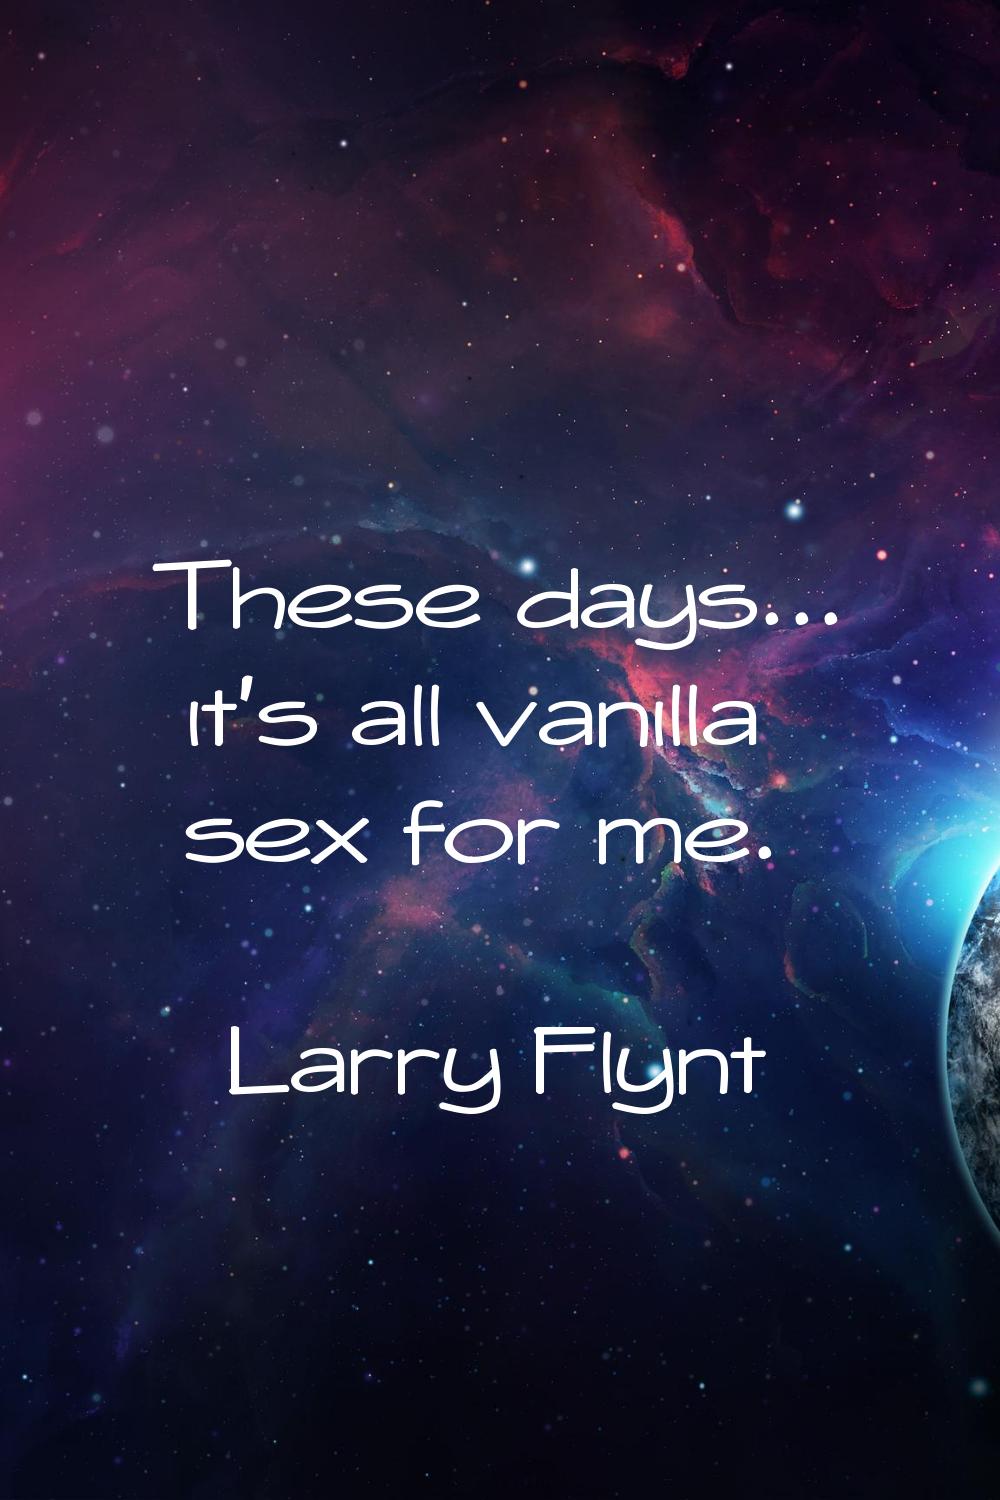 These days... it's all vanilla sex for me.